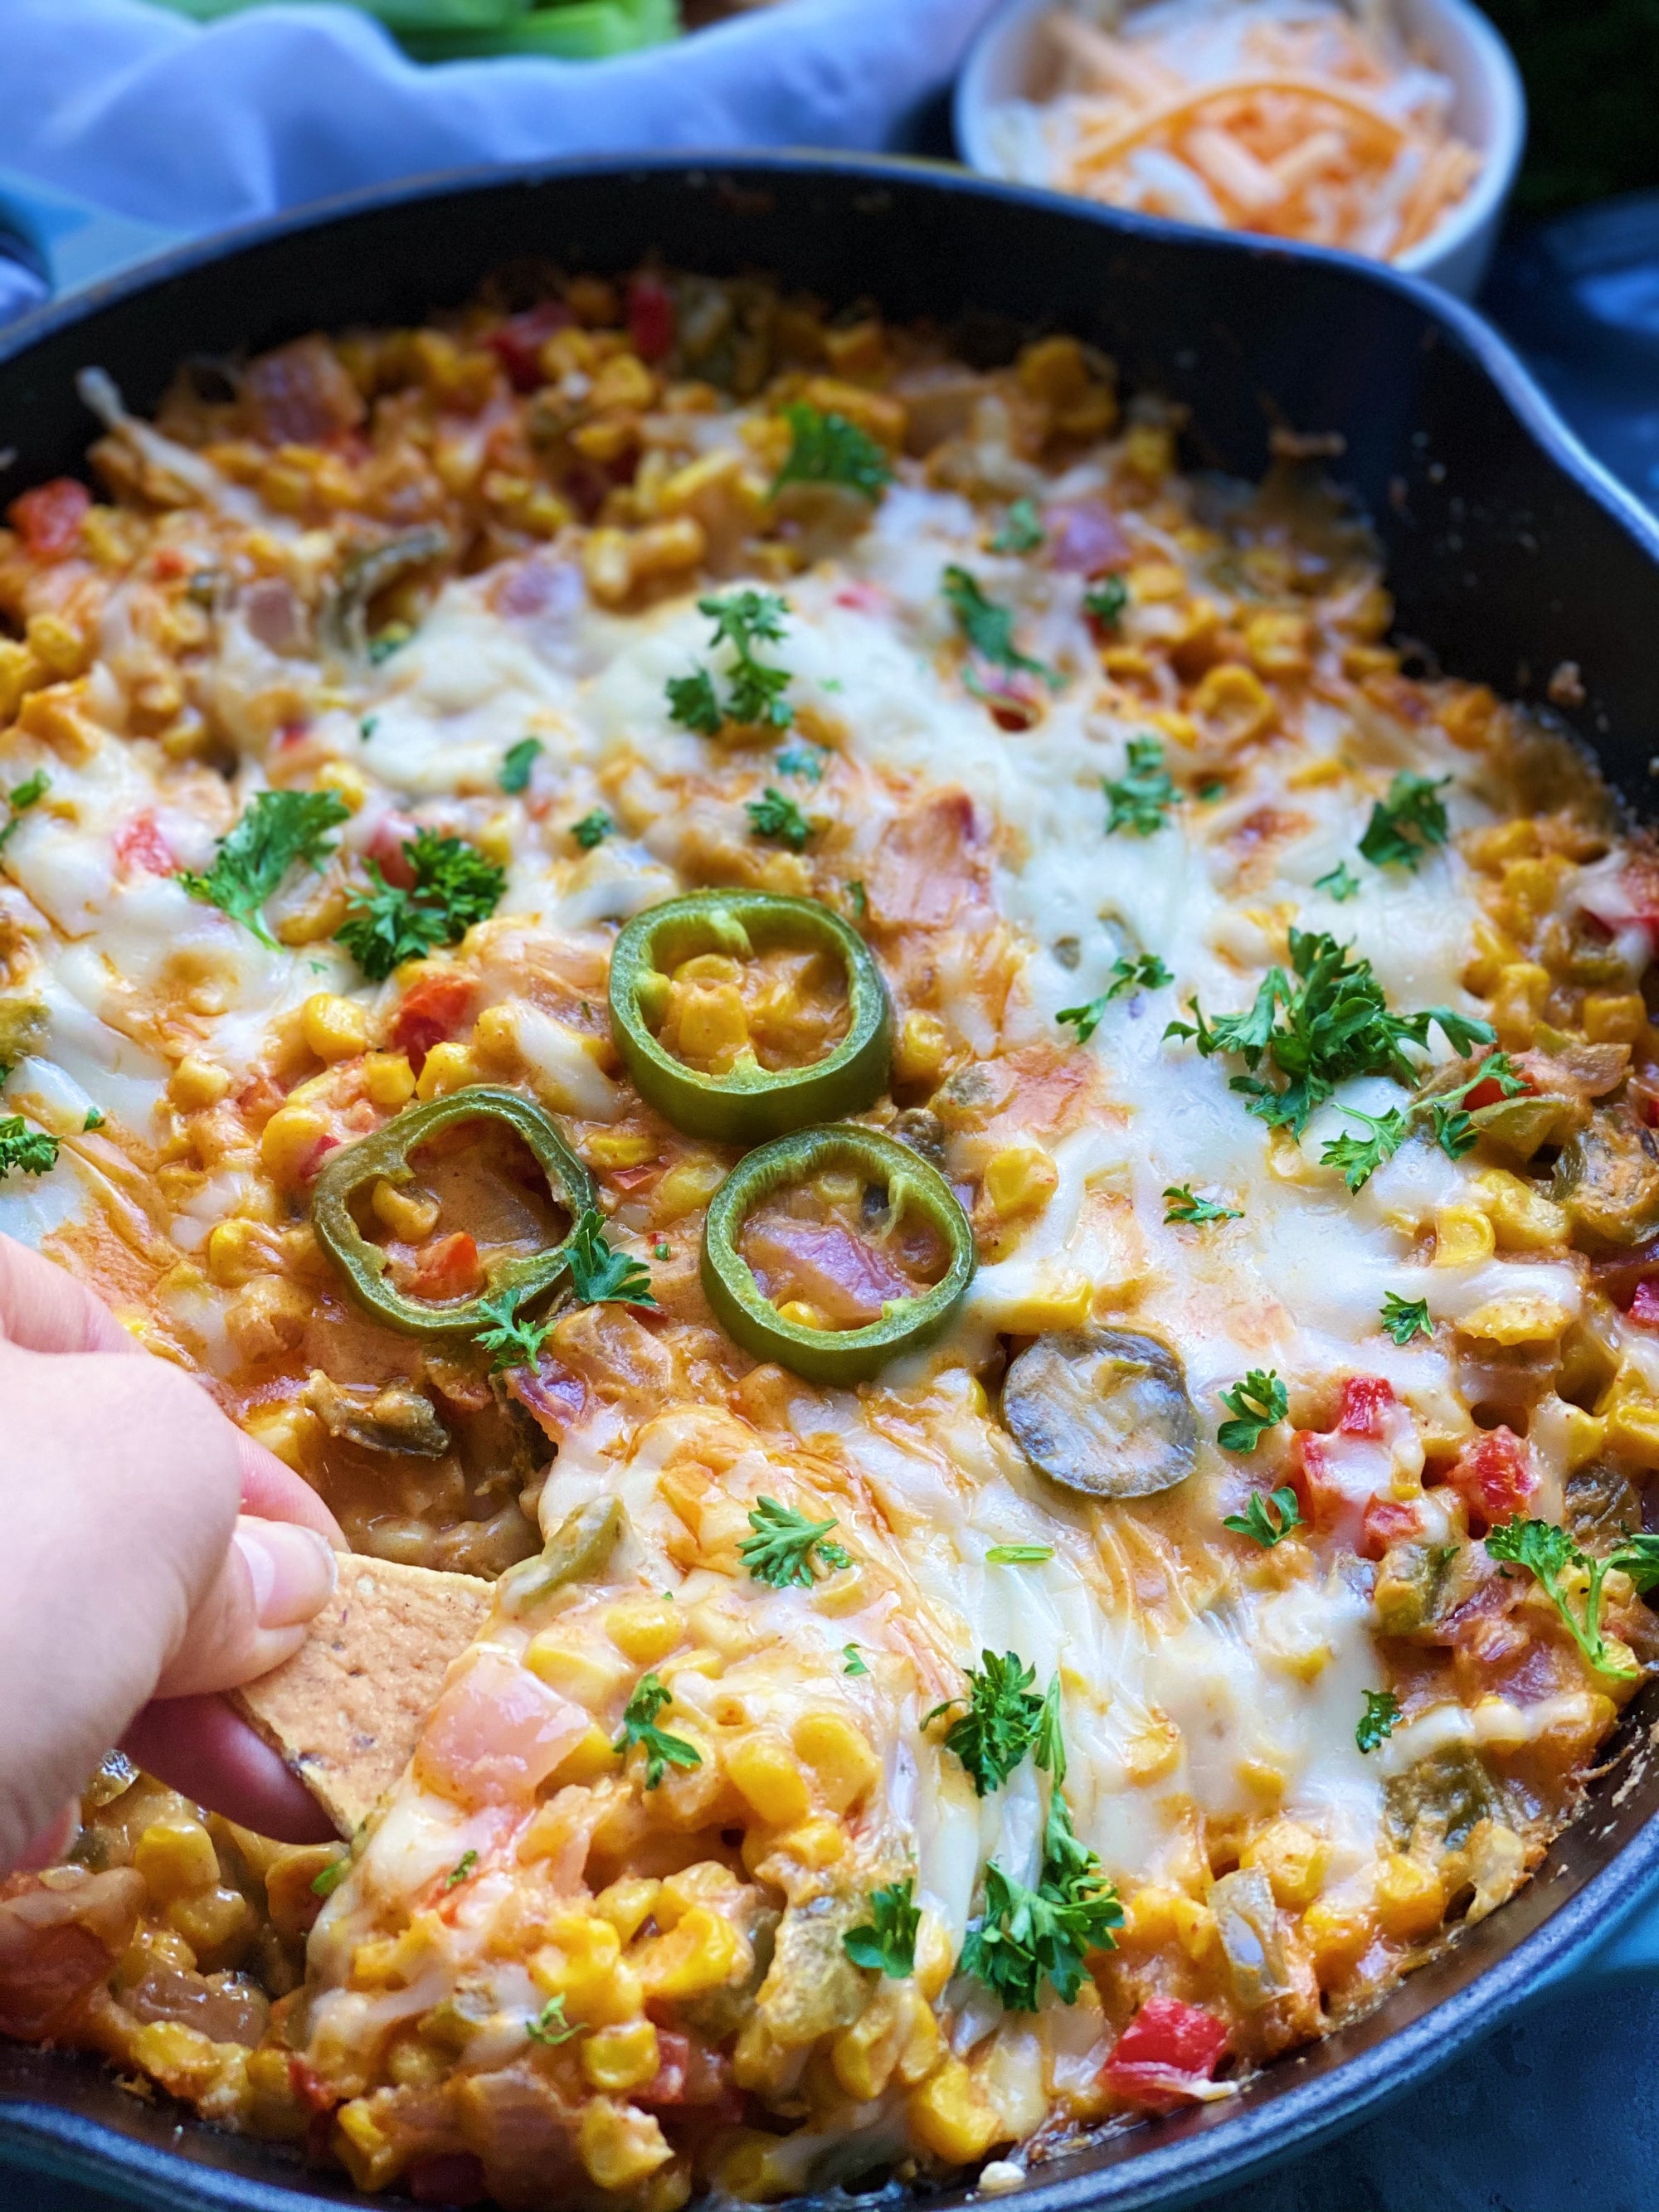 Spicy Mexican Corn Dip - Tasty As Fit